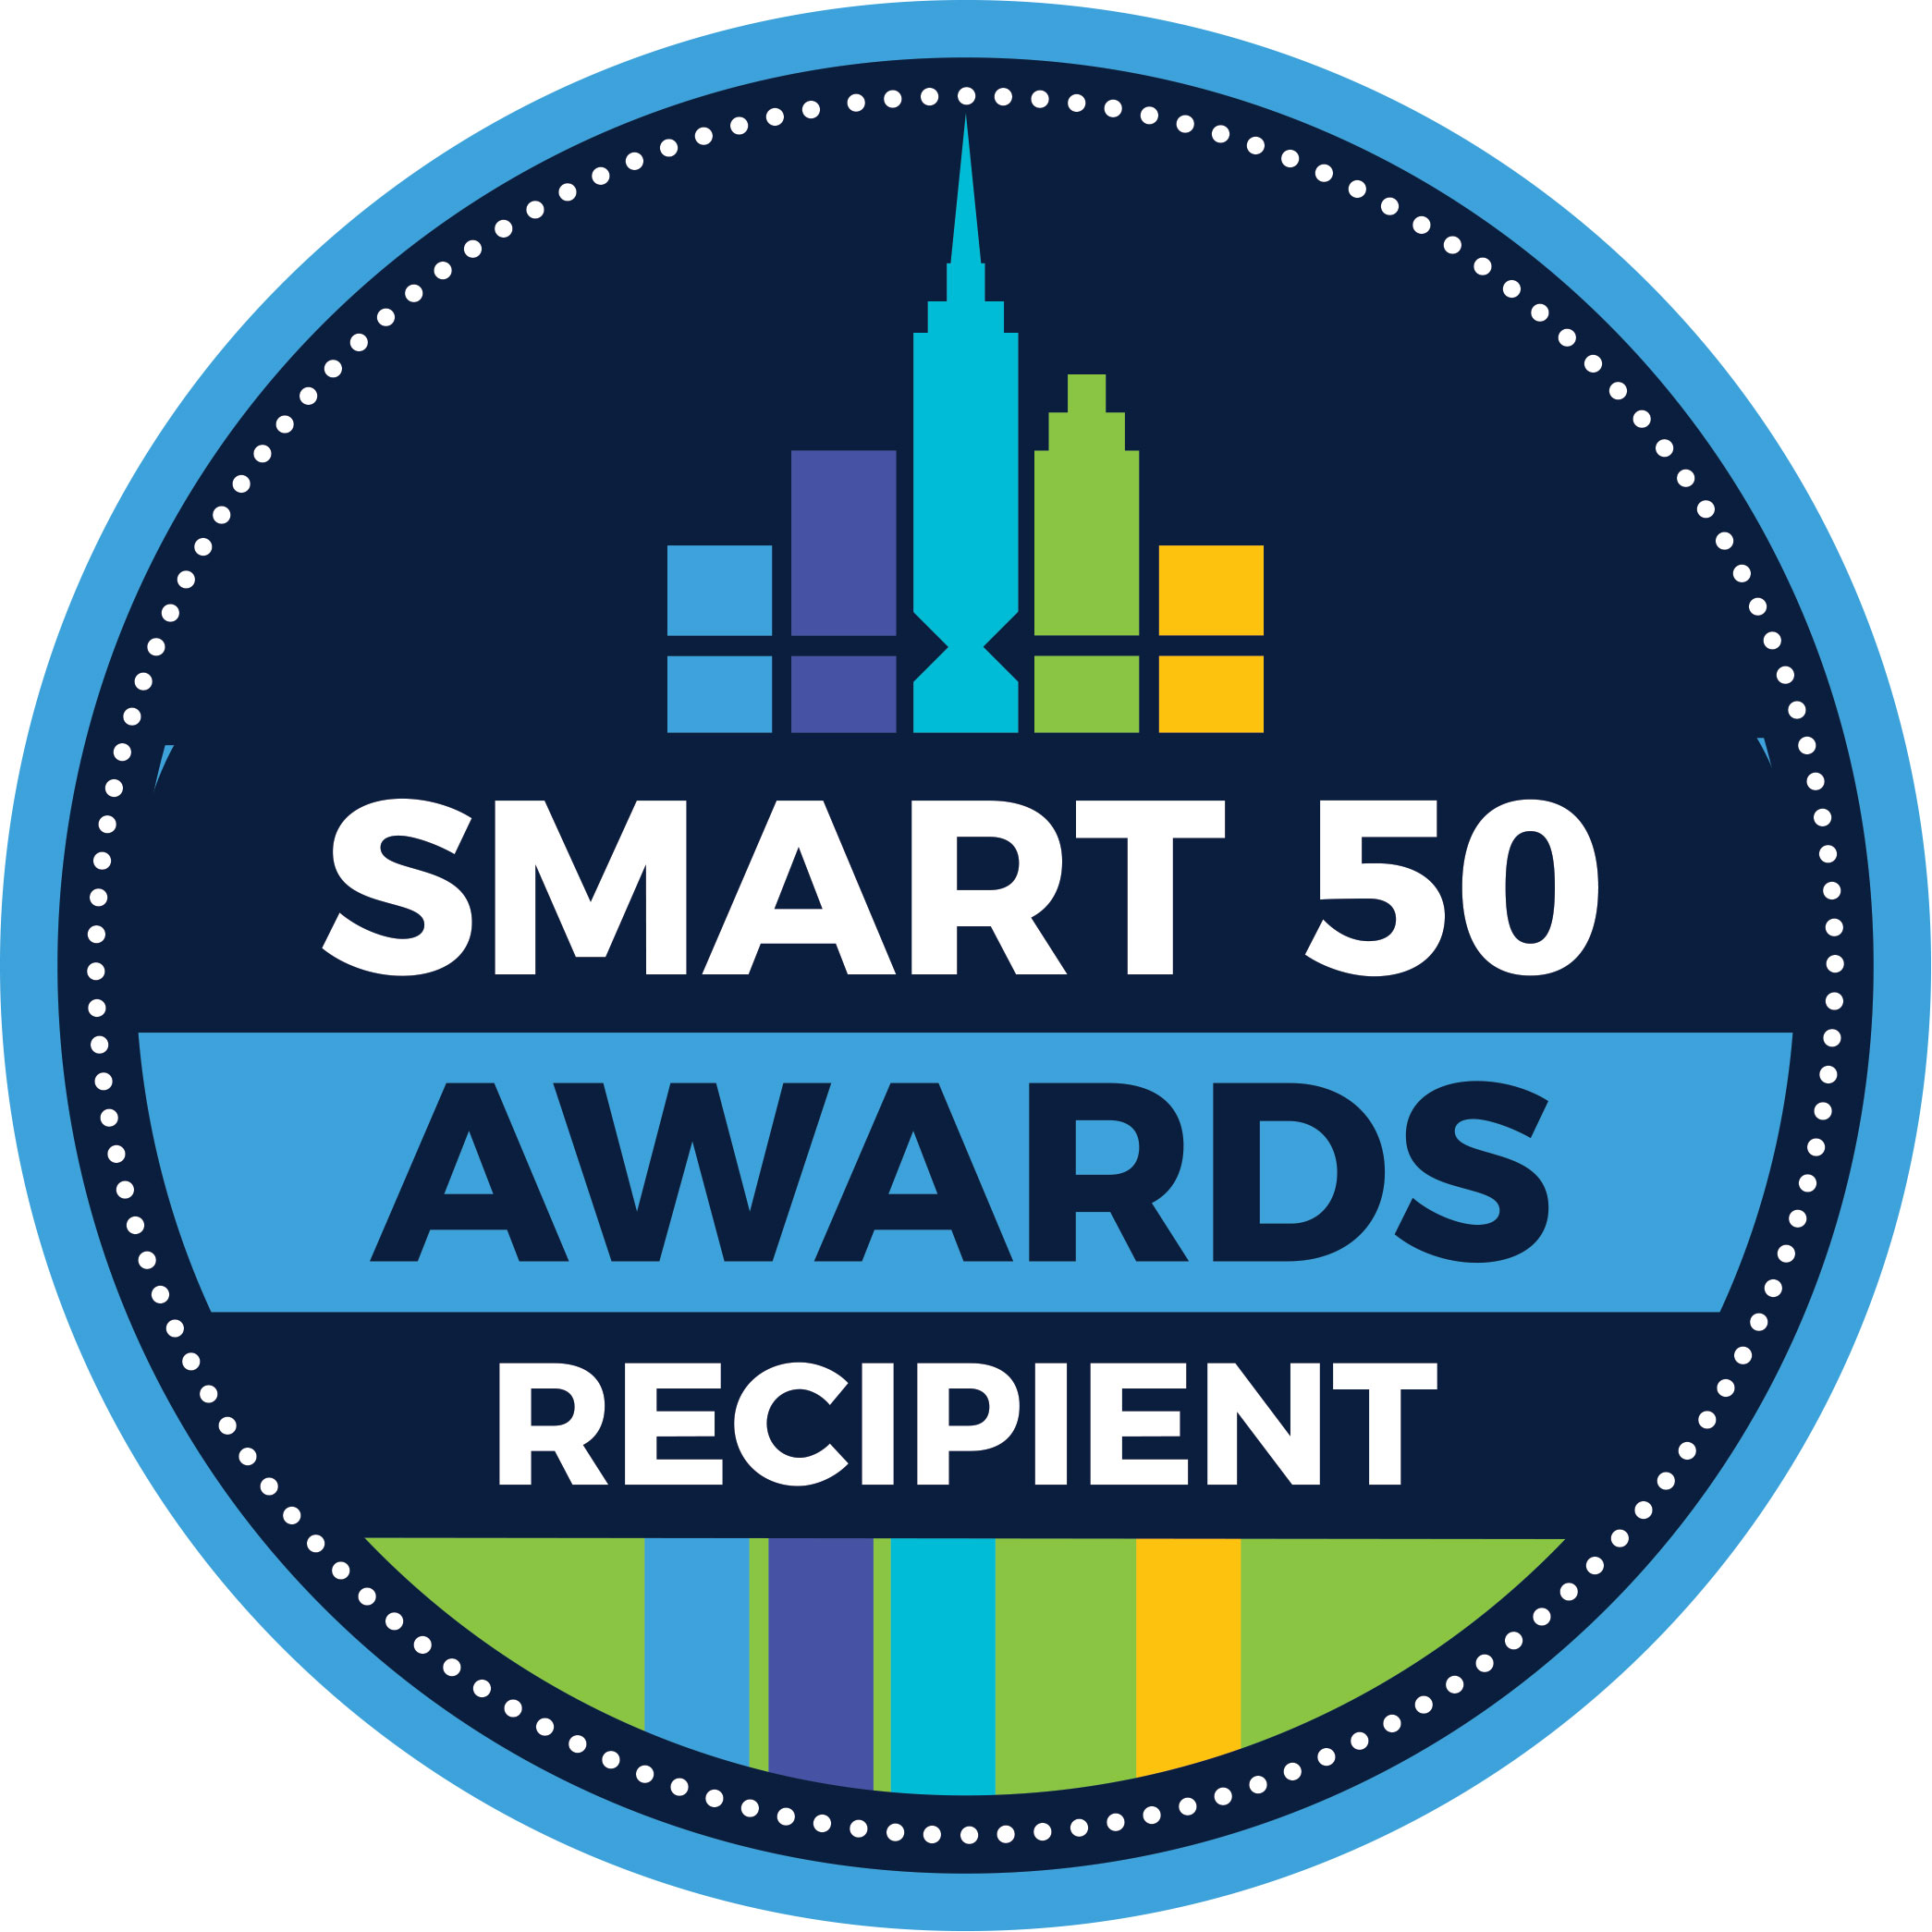 The OASC Ireland, Insight and HOP Smart City project has been selected for the 50 Best Projects in the world by the GCTC Expo